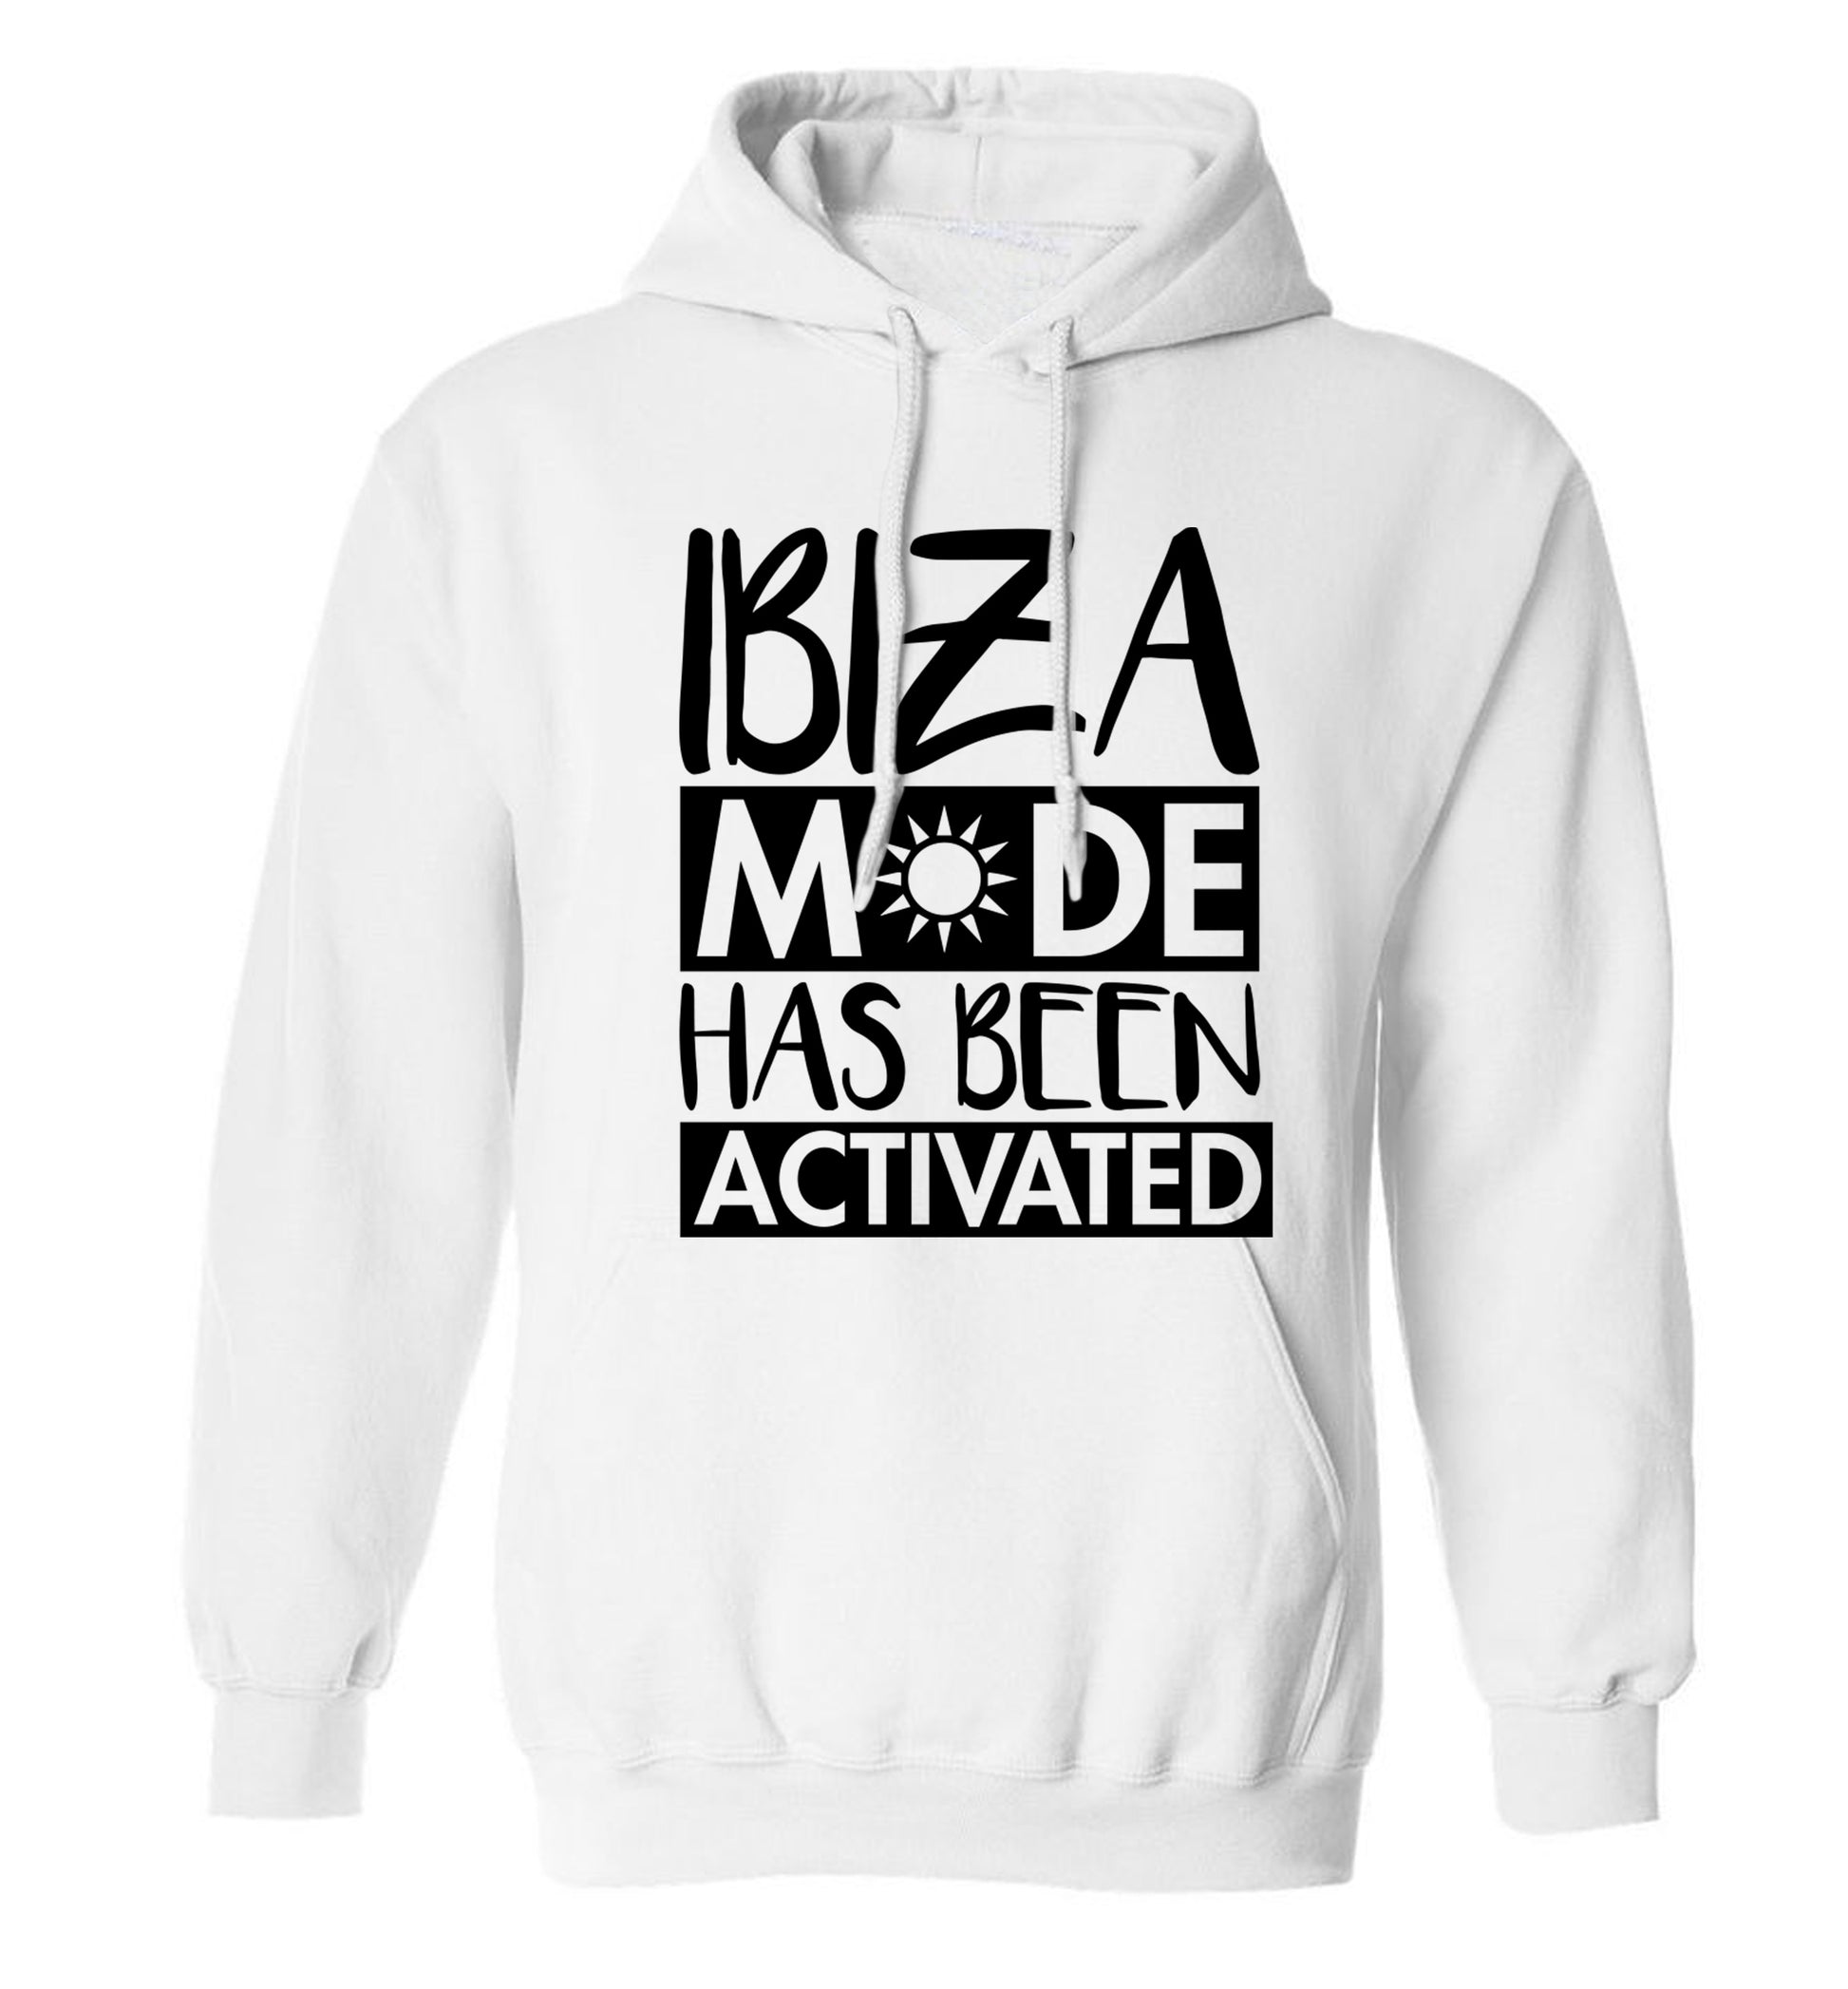 Ibiza mode has been activated adults unisex white hoodie 2XL